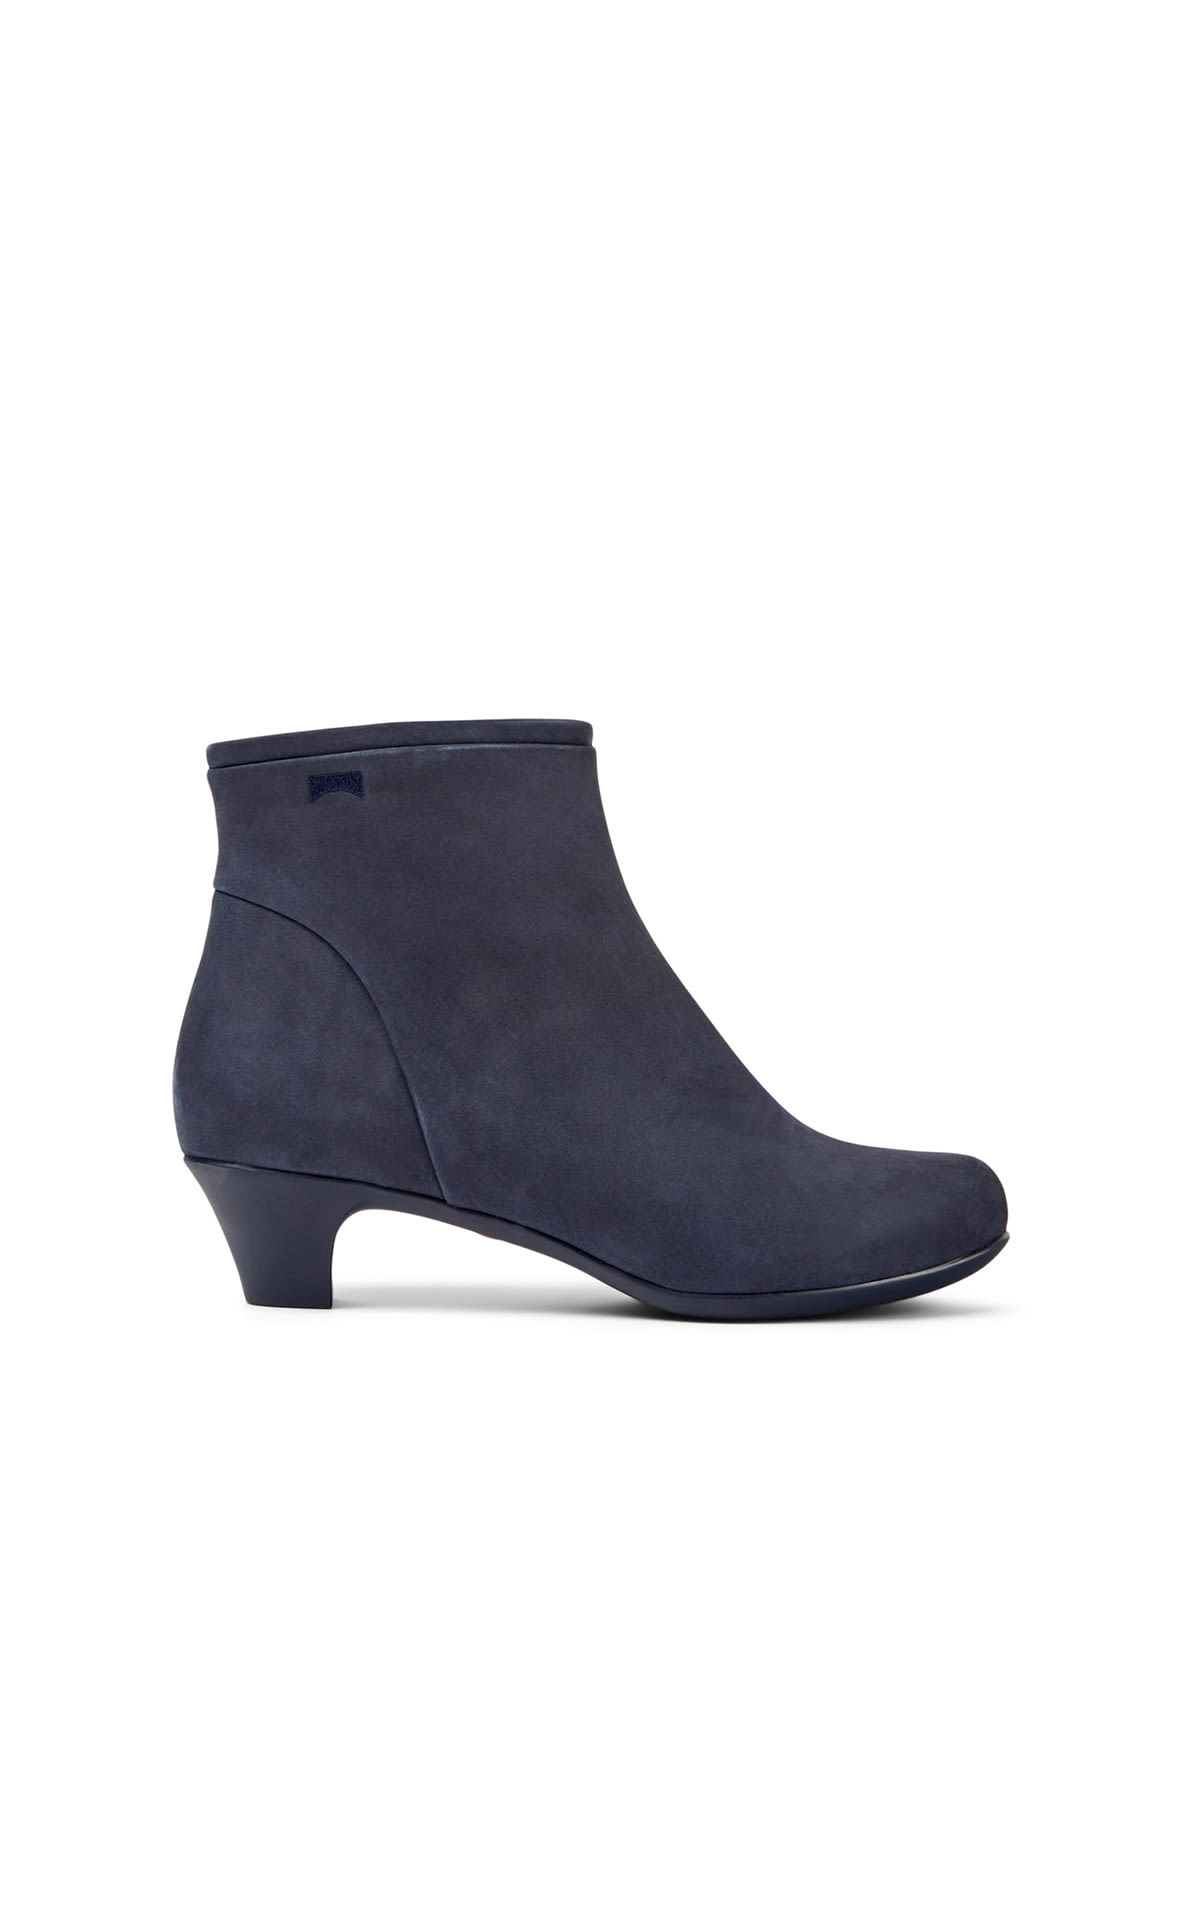 Blue women's ankle boots camper